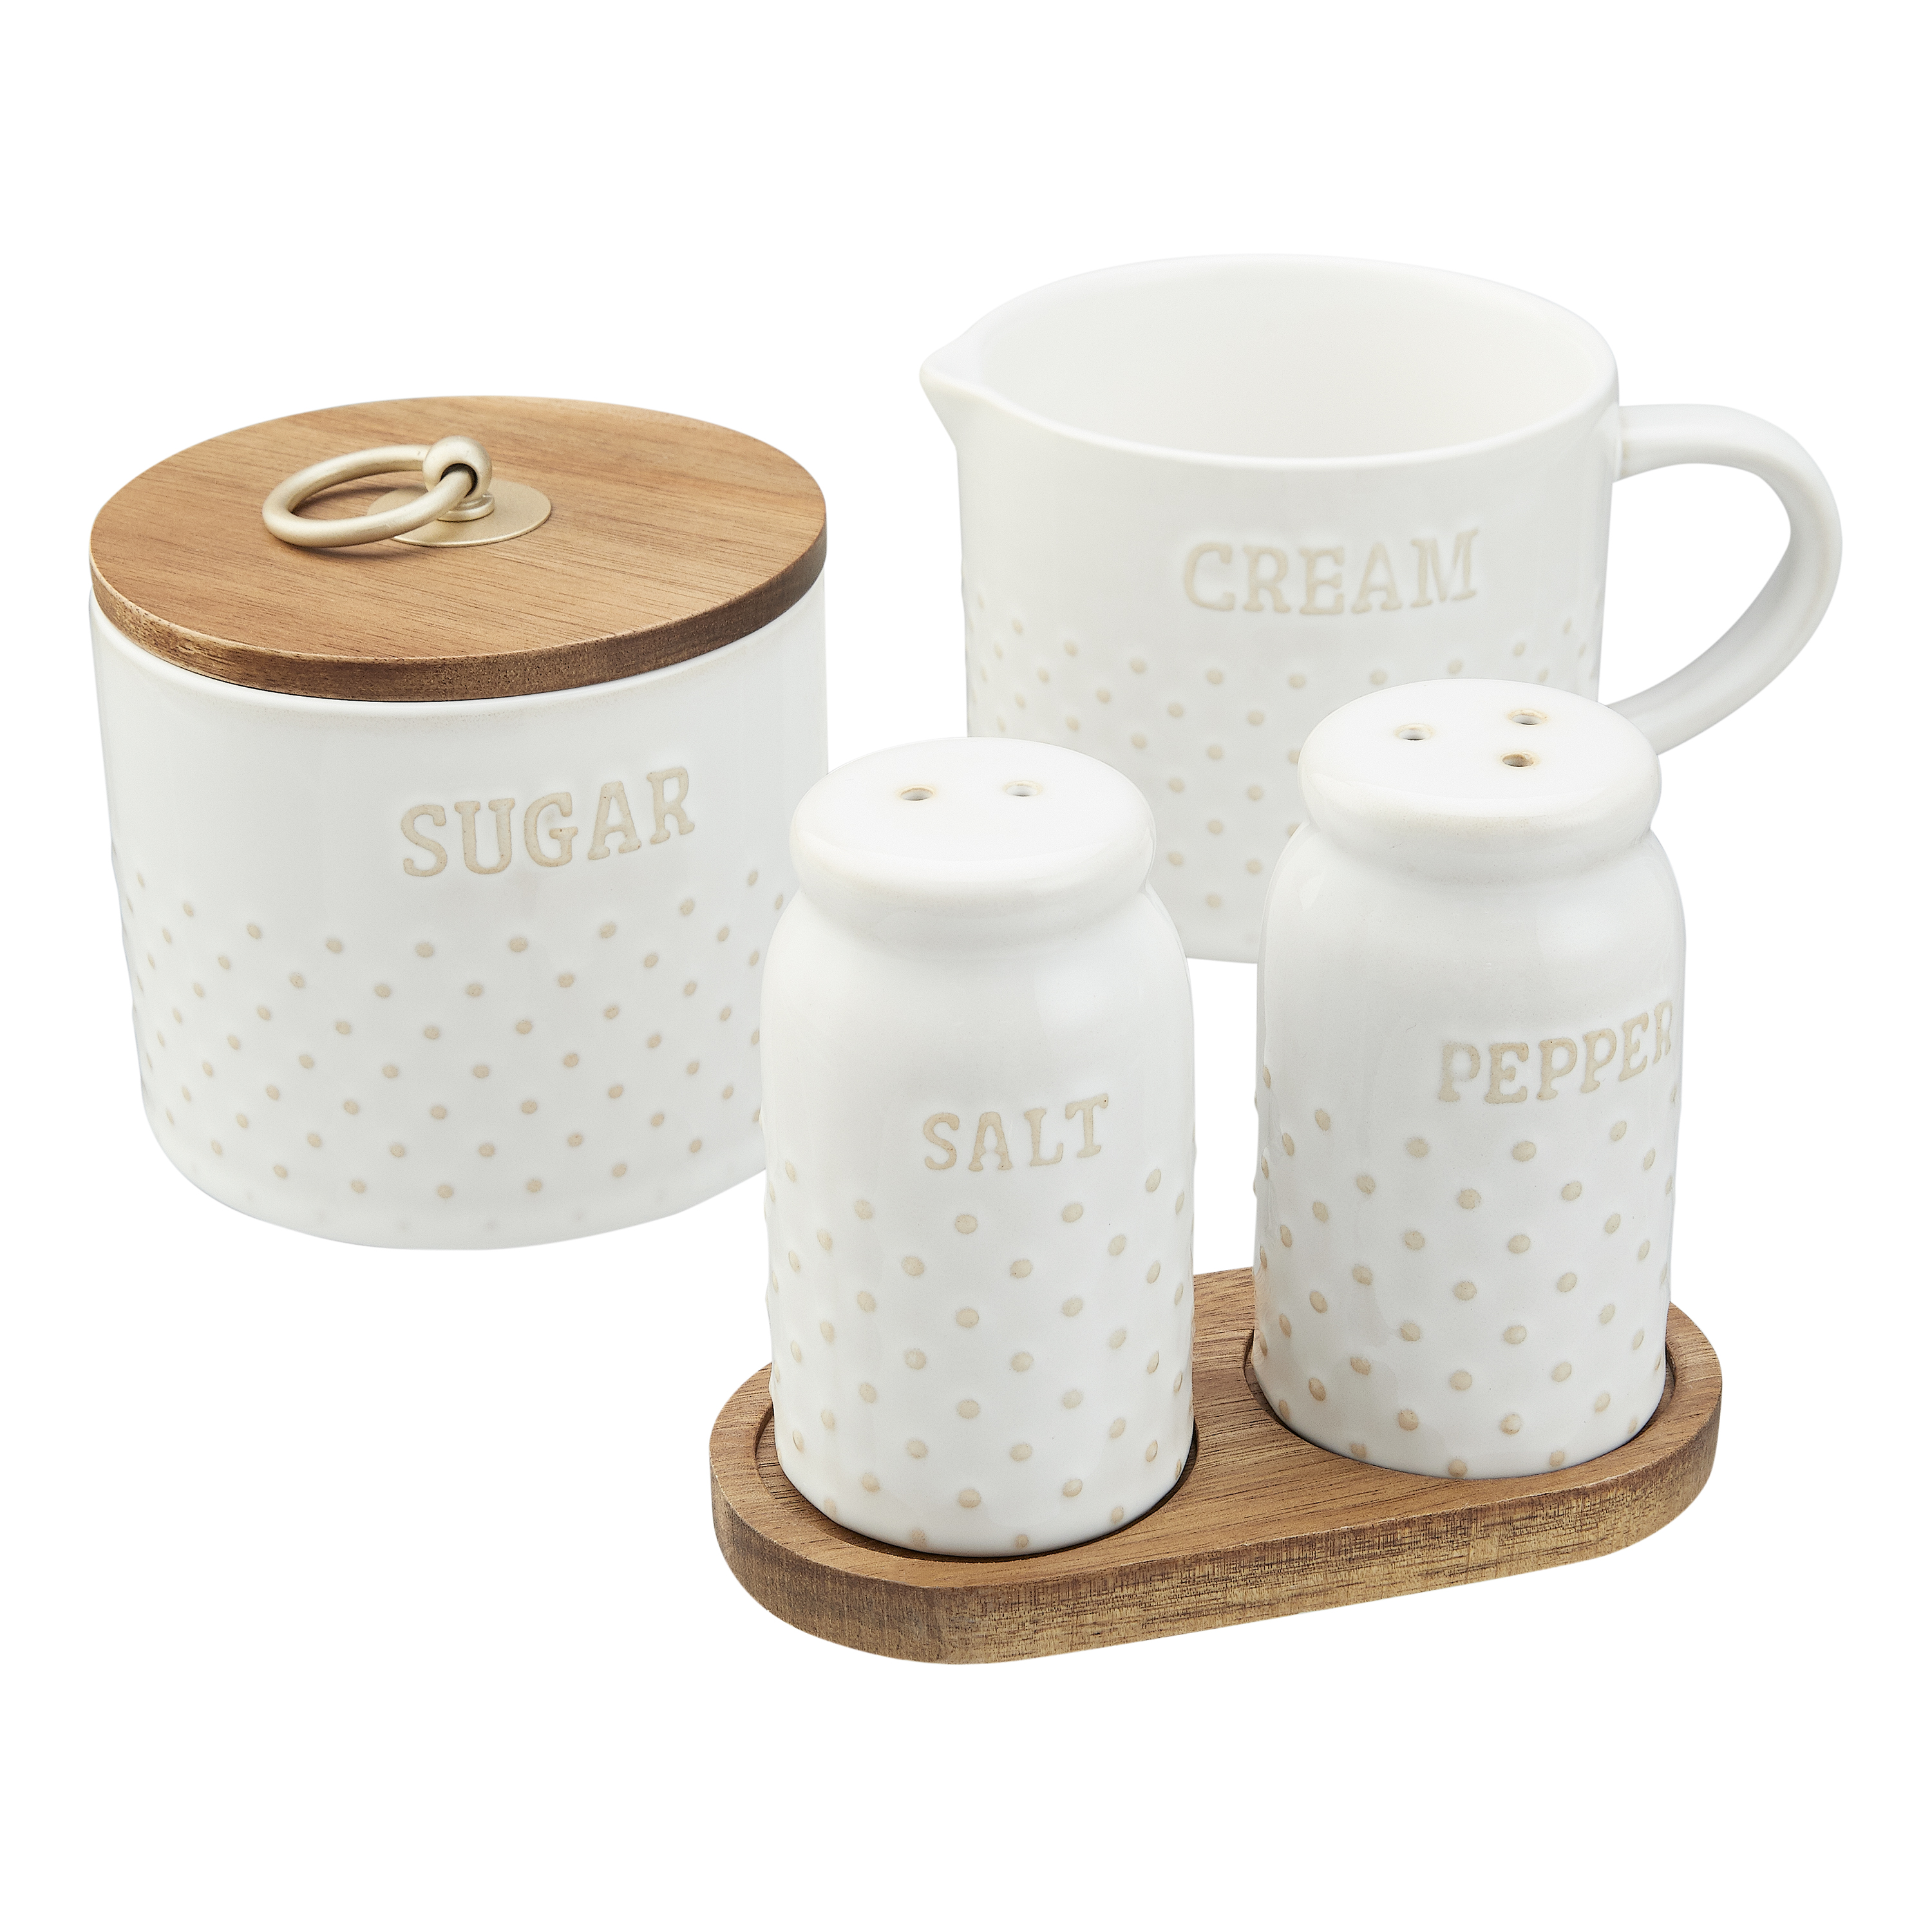 Better Homes & Gardens Farmhouse 4-Piece Dotted Sugar Cannister, Creamer, and Salt and Pepper Shaker Set in White - image 1 of 6